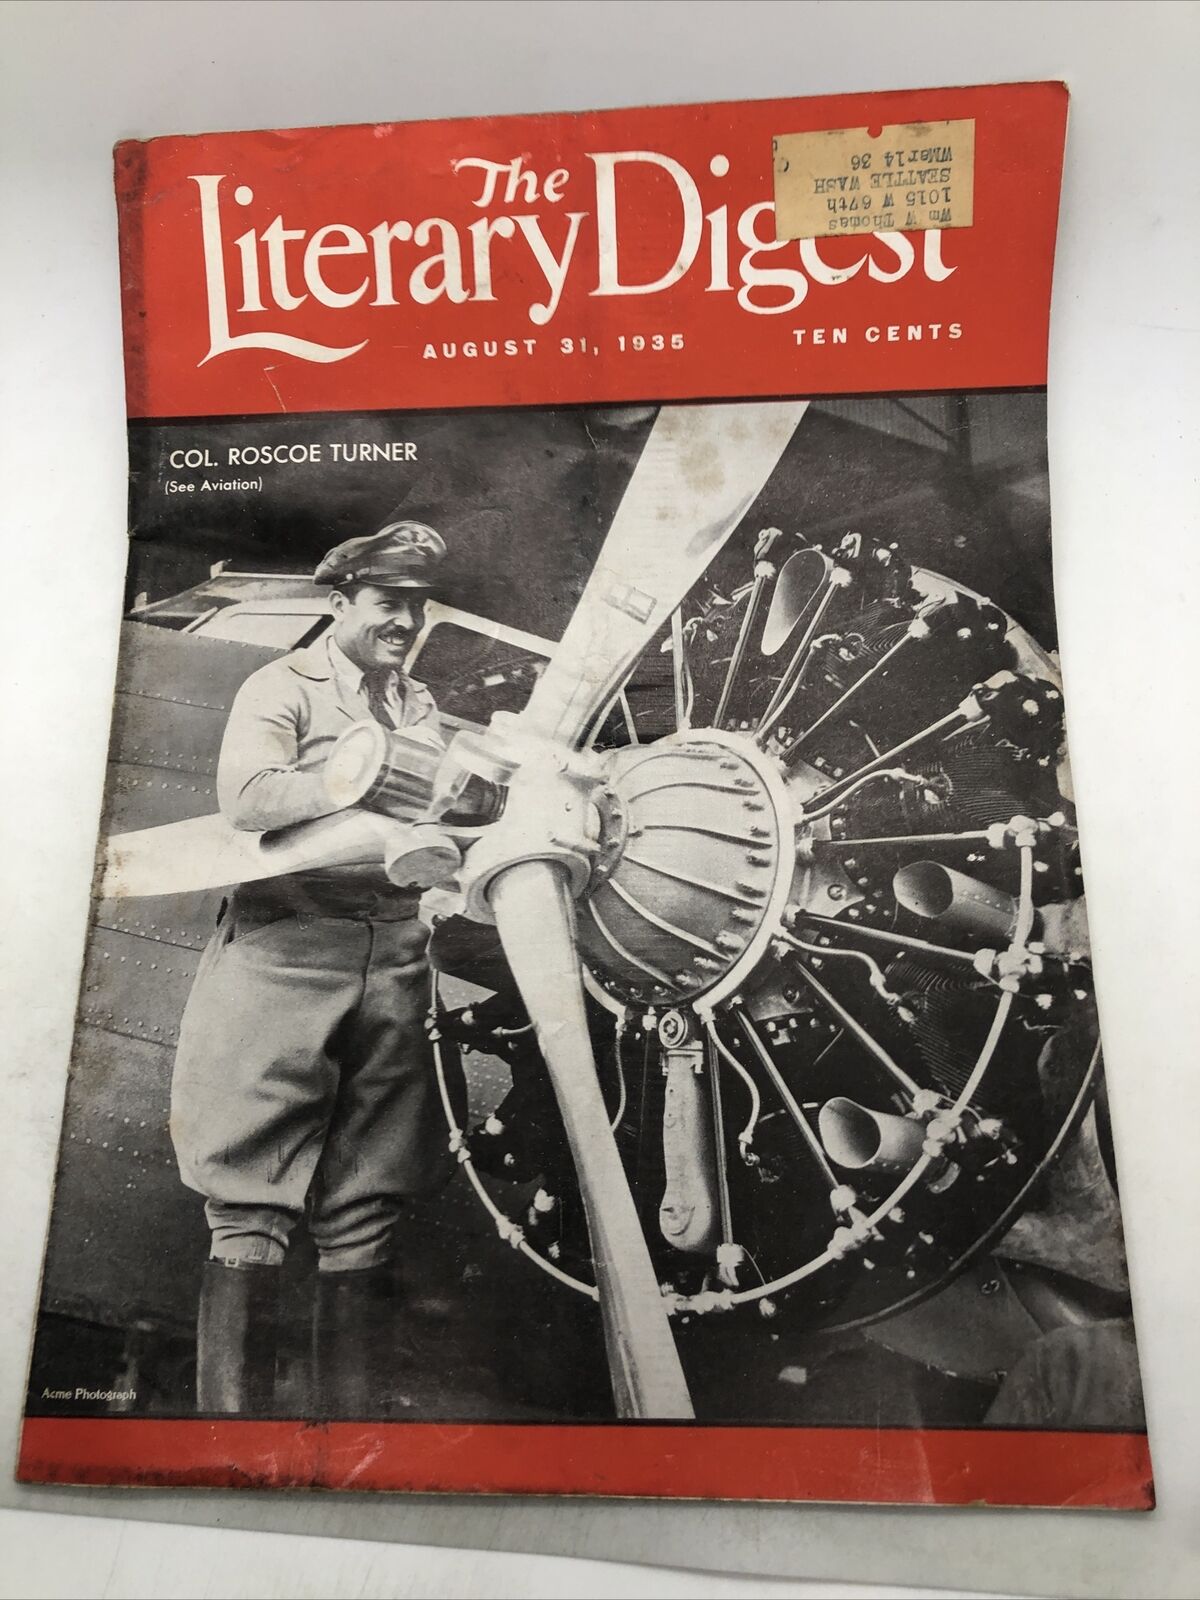 The Literary Digest August 31, 1935 Col. Roscoe Turner Cover